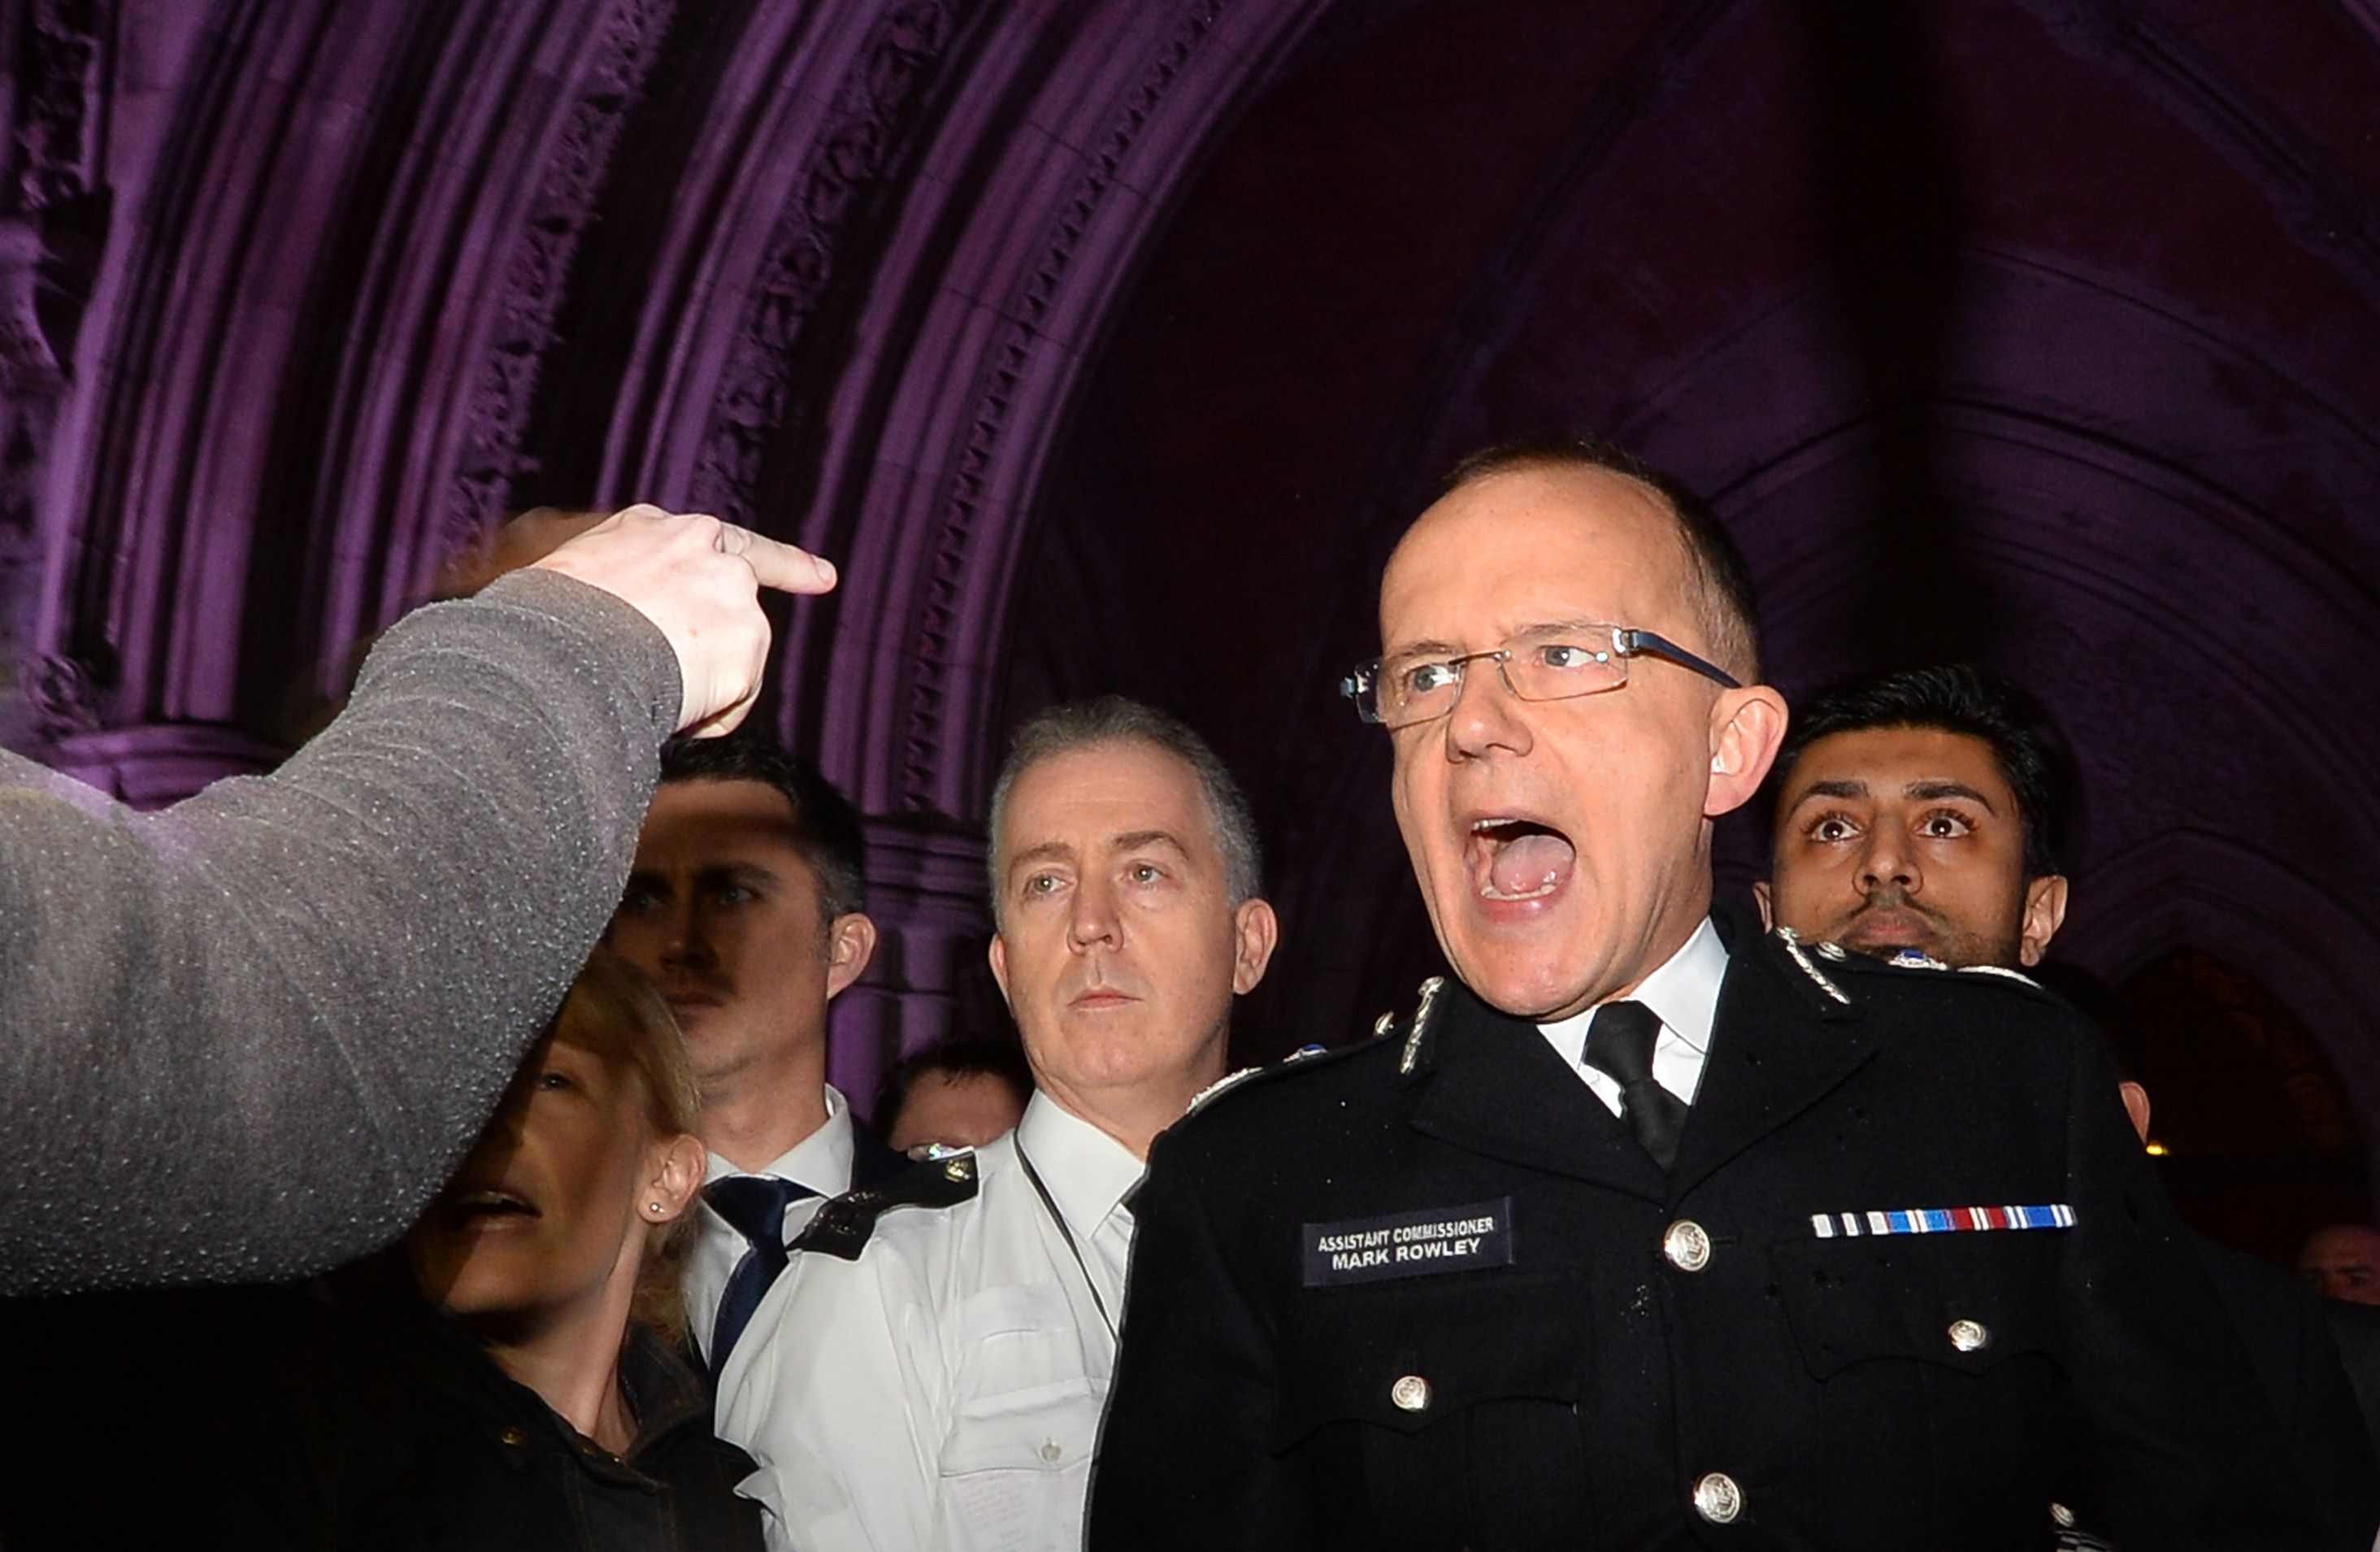 Assistant Commissioner Mark Rowley addresses the media and the public outside the Royal Courts of Justice in London. Photo: AFP